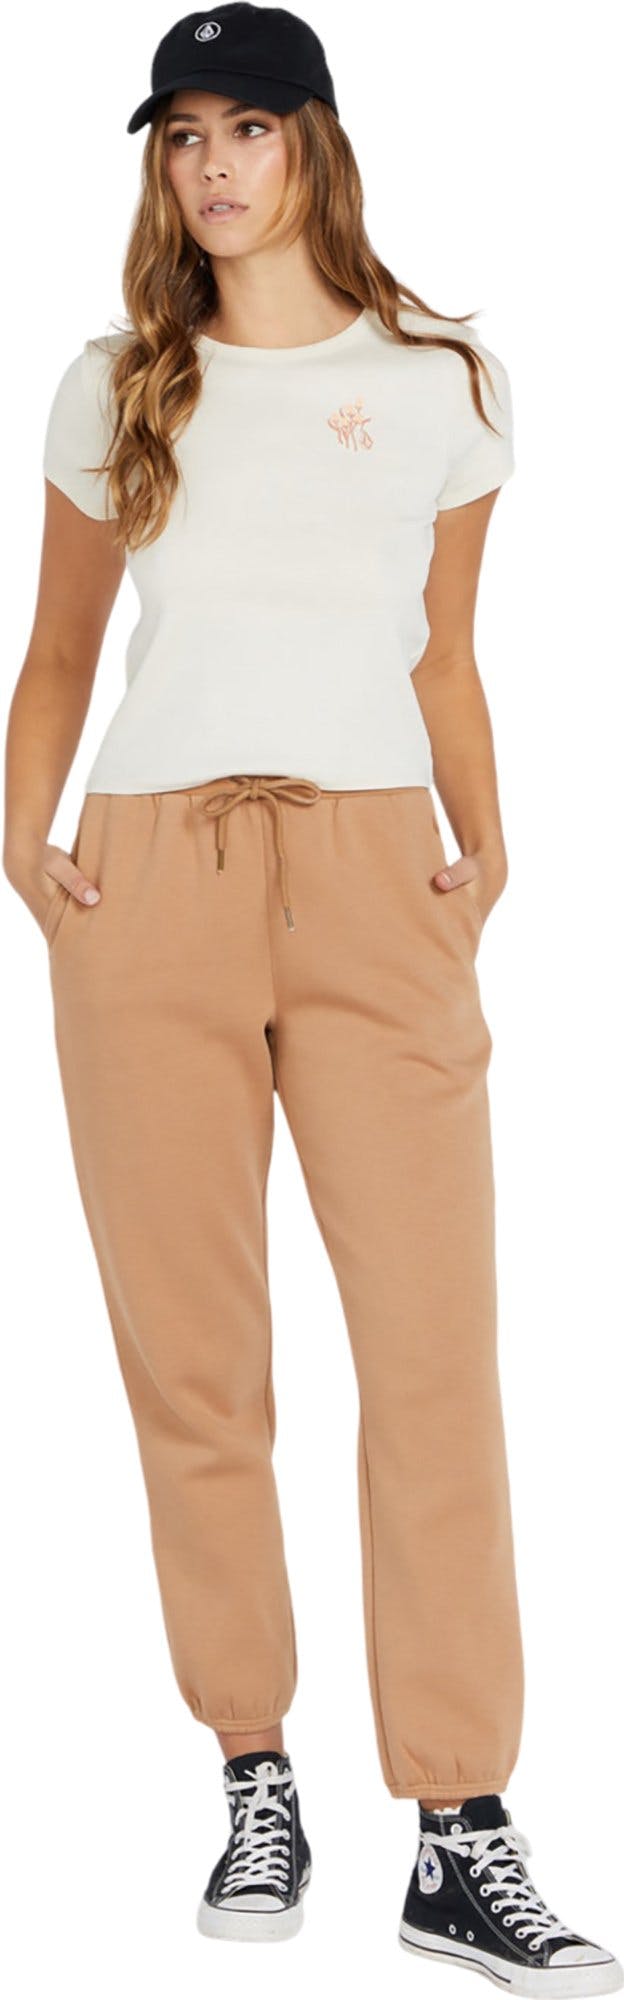 Product image for Stone Heart II Pant - Women's